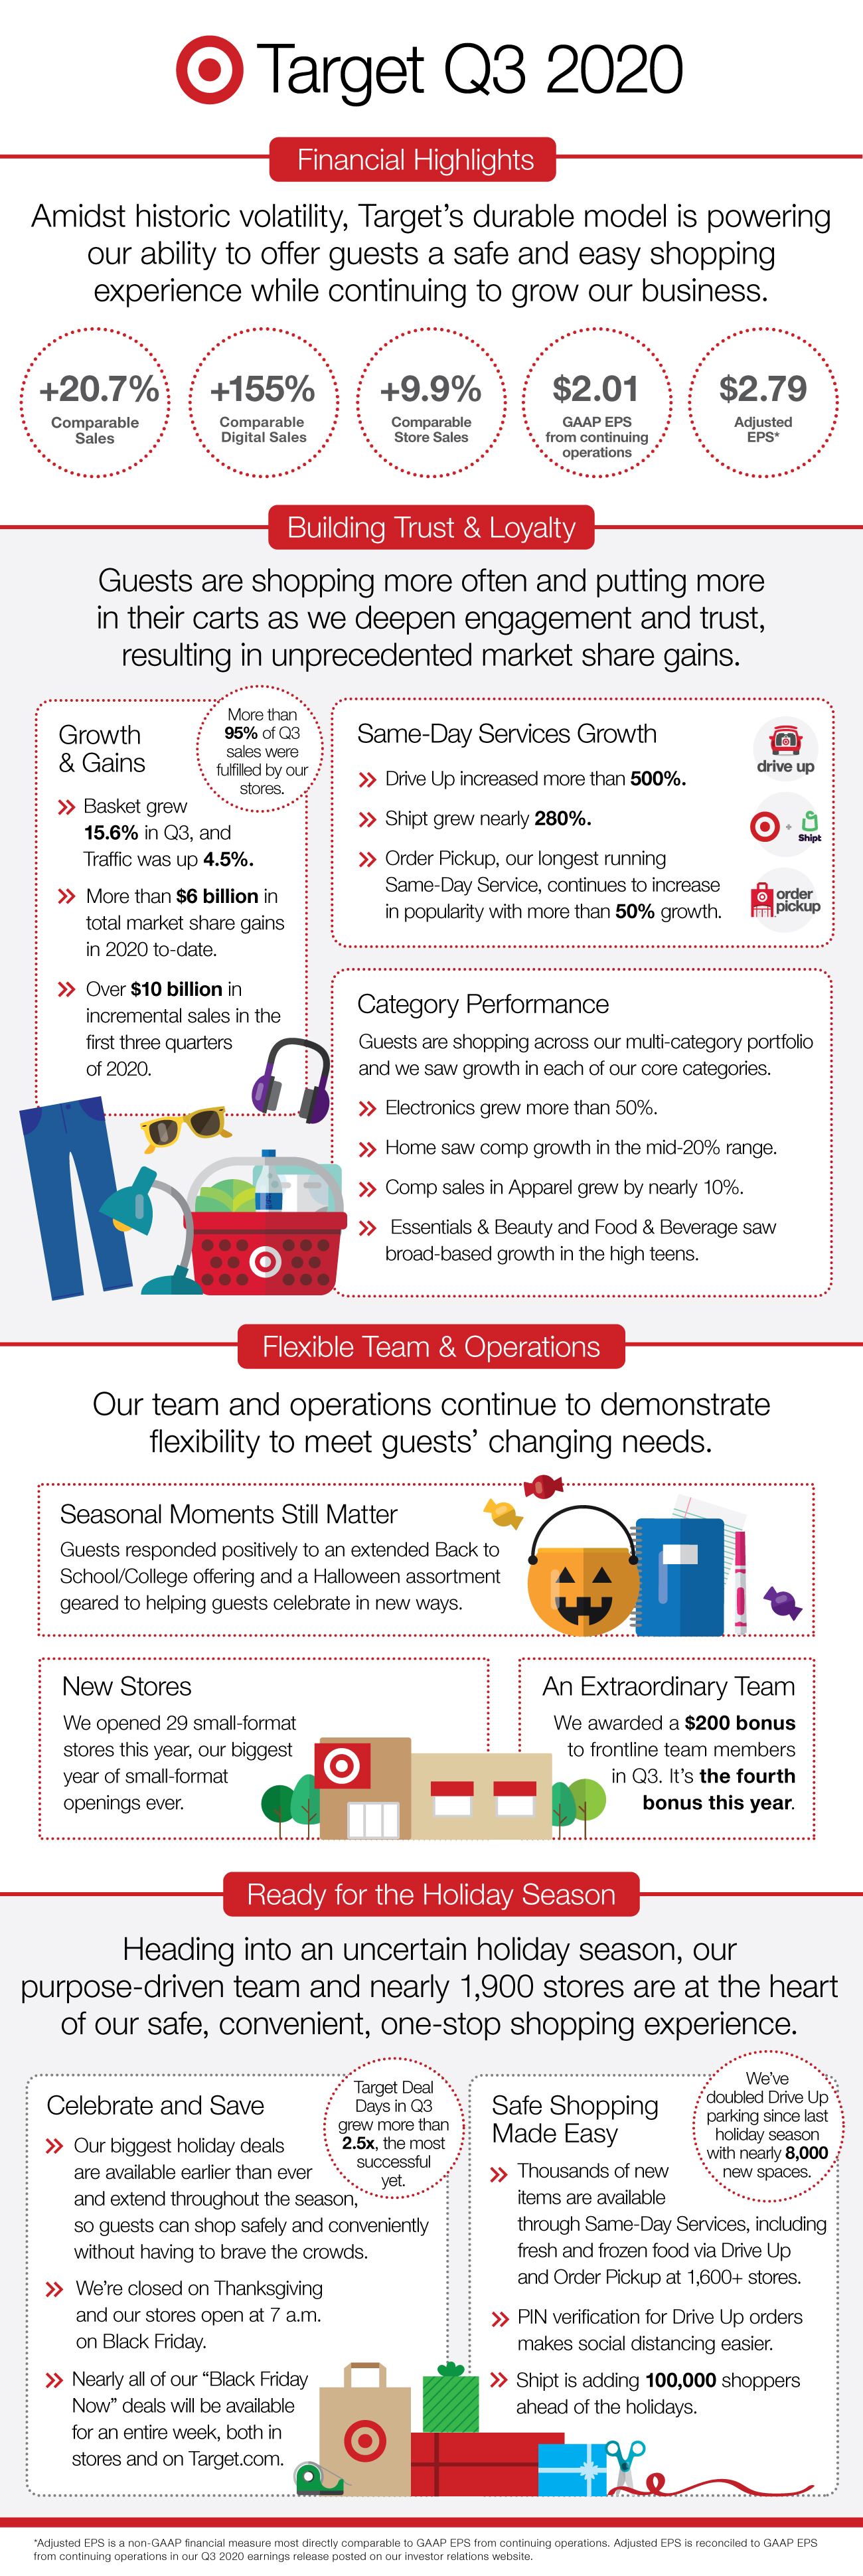 An infographic with black and red text and colorful illustrations on a white background showing highlights from Target's Q3 earnings release.